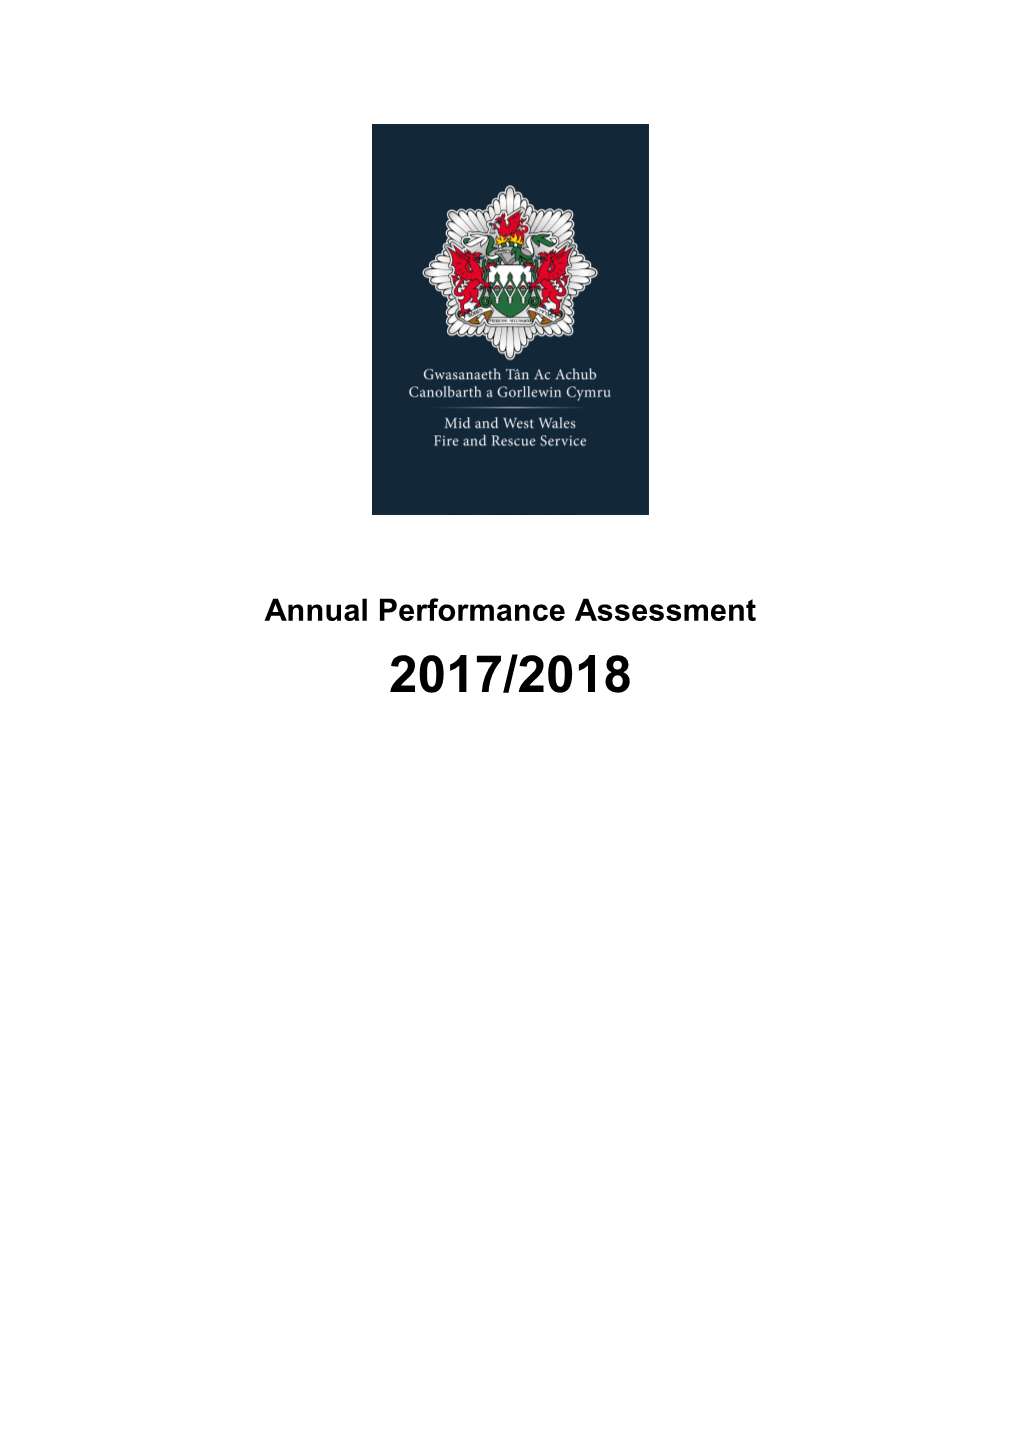 Annual Performance Assessment 2017/2018